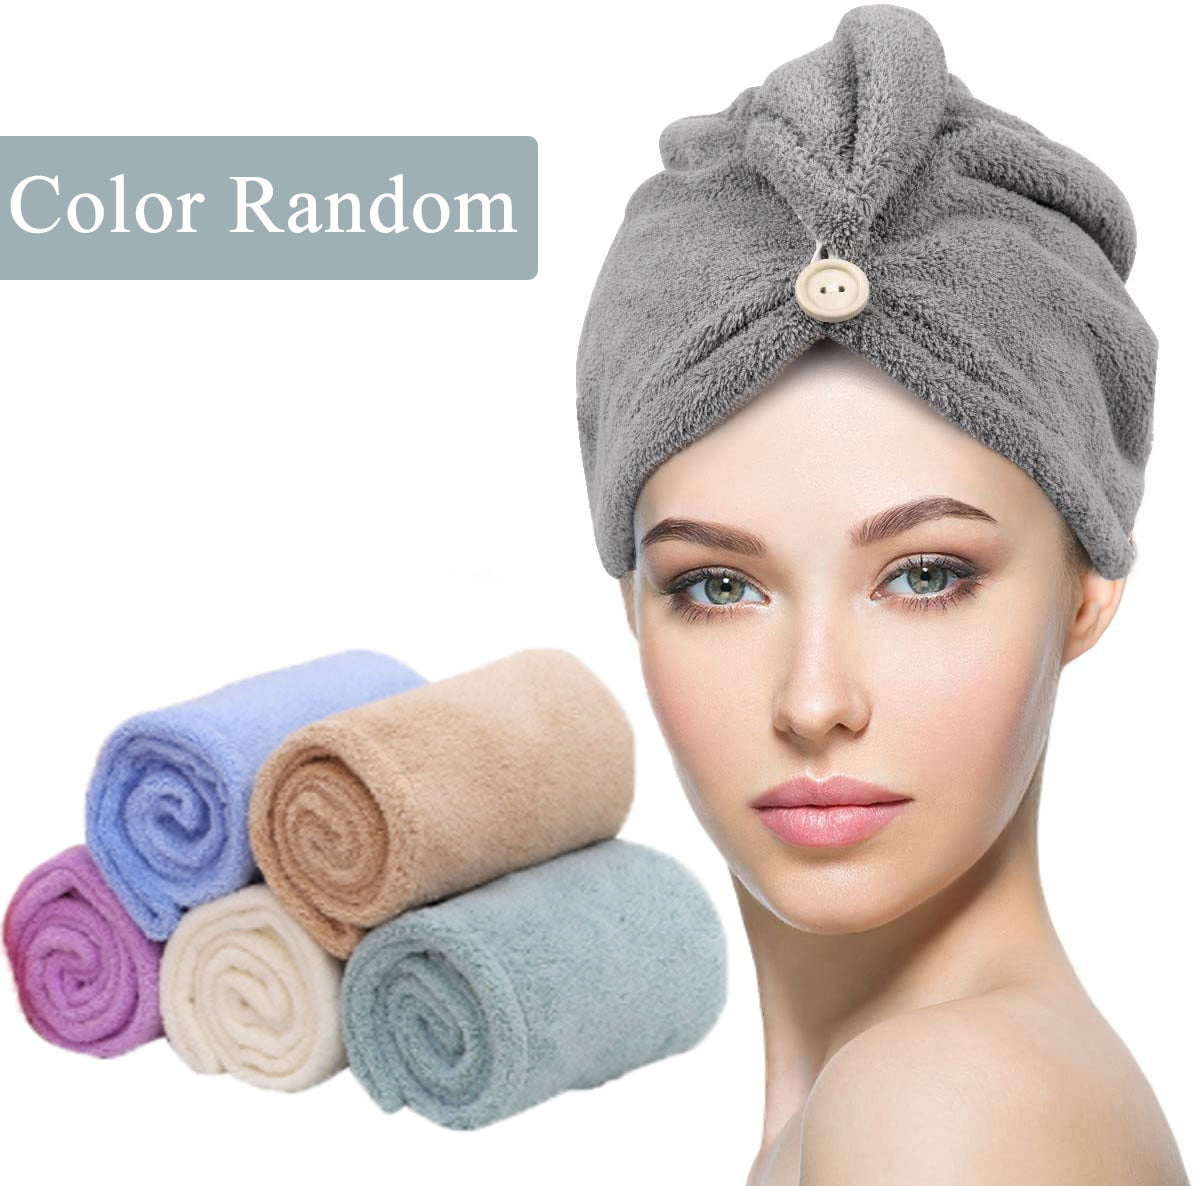 RAPID DRYING HAIR TOWEL Thick Absorbent Shower Cap 5%OFF 